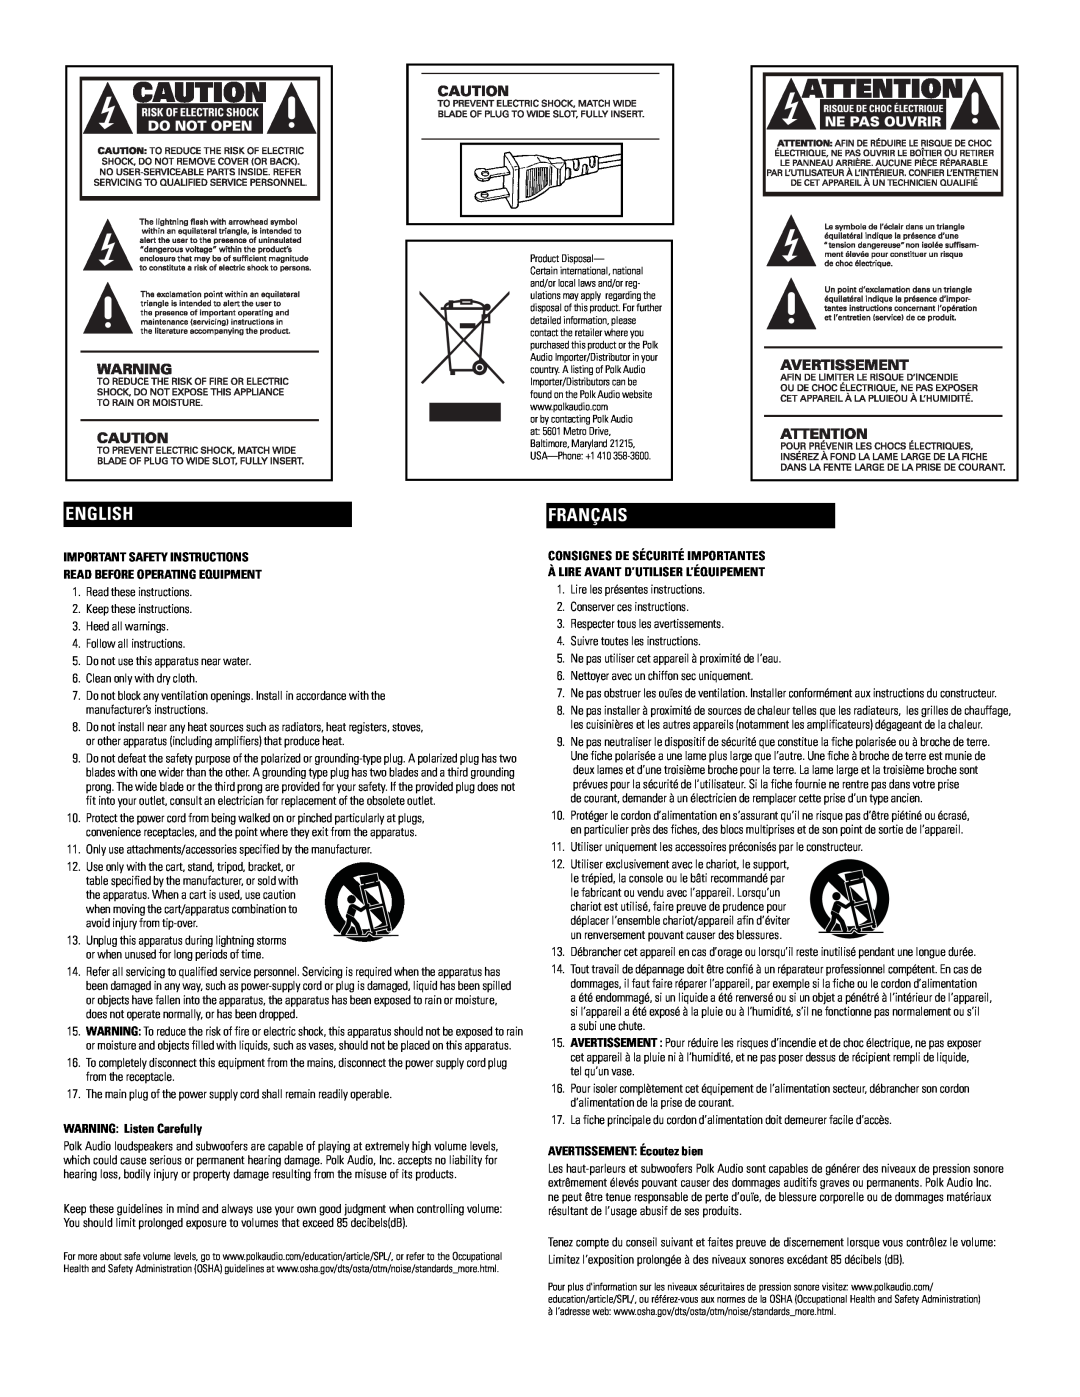 Polk Audio PSW10, PSW12 owner manual Français, English, Important Safety Instructions, Read Before Operating Equipment 